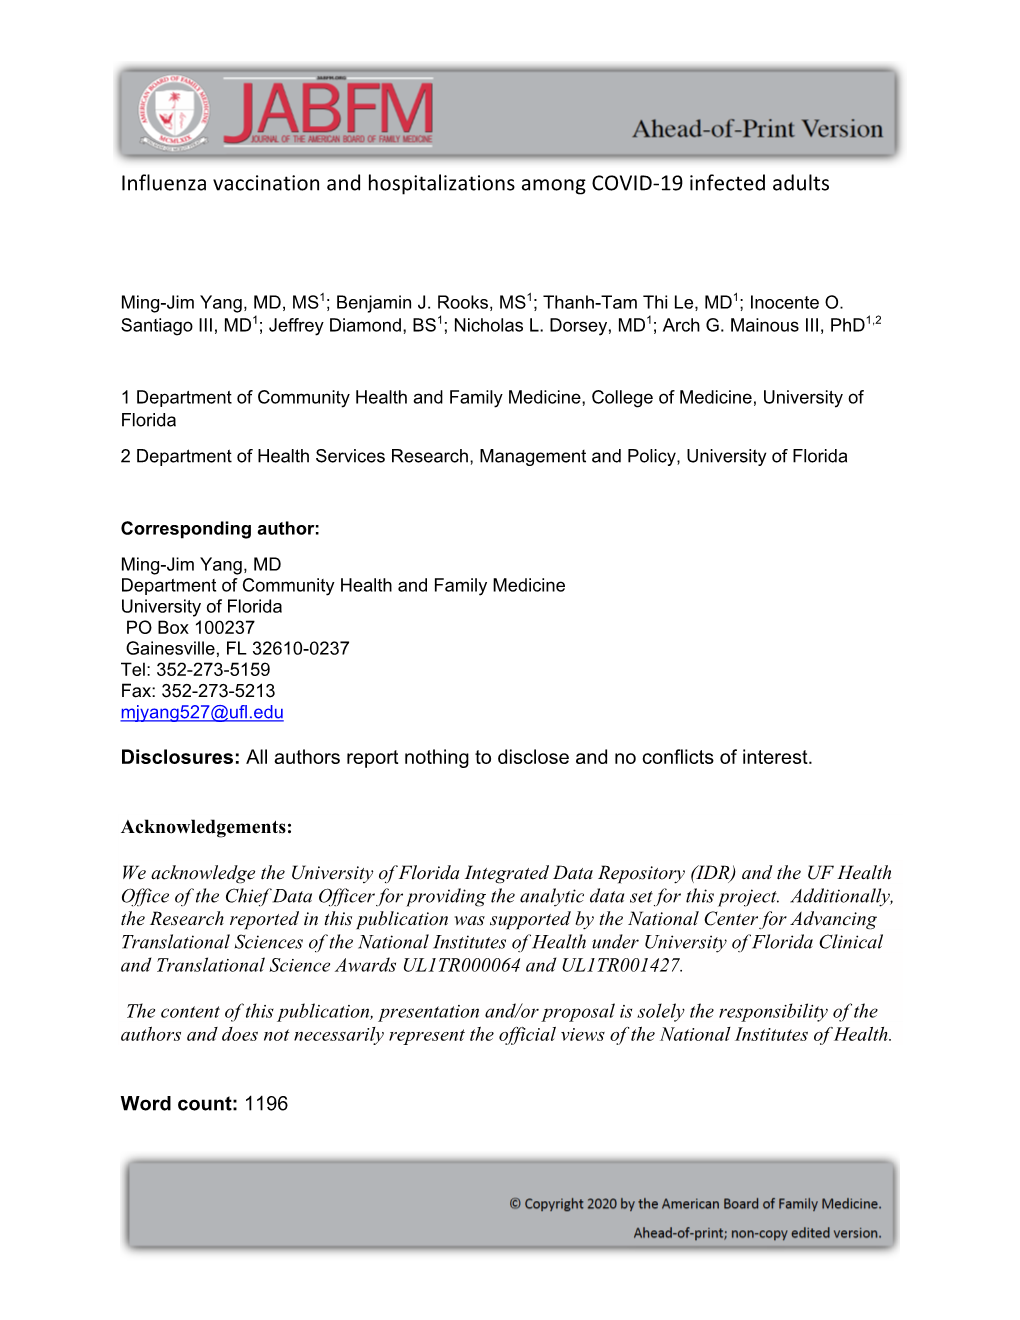 Influenza Vaccination and Hospitalizations Among COVID-19 Infected Adults